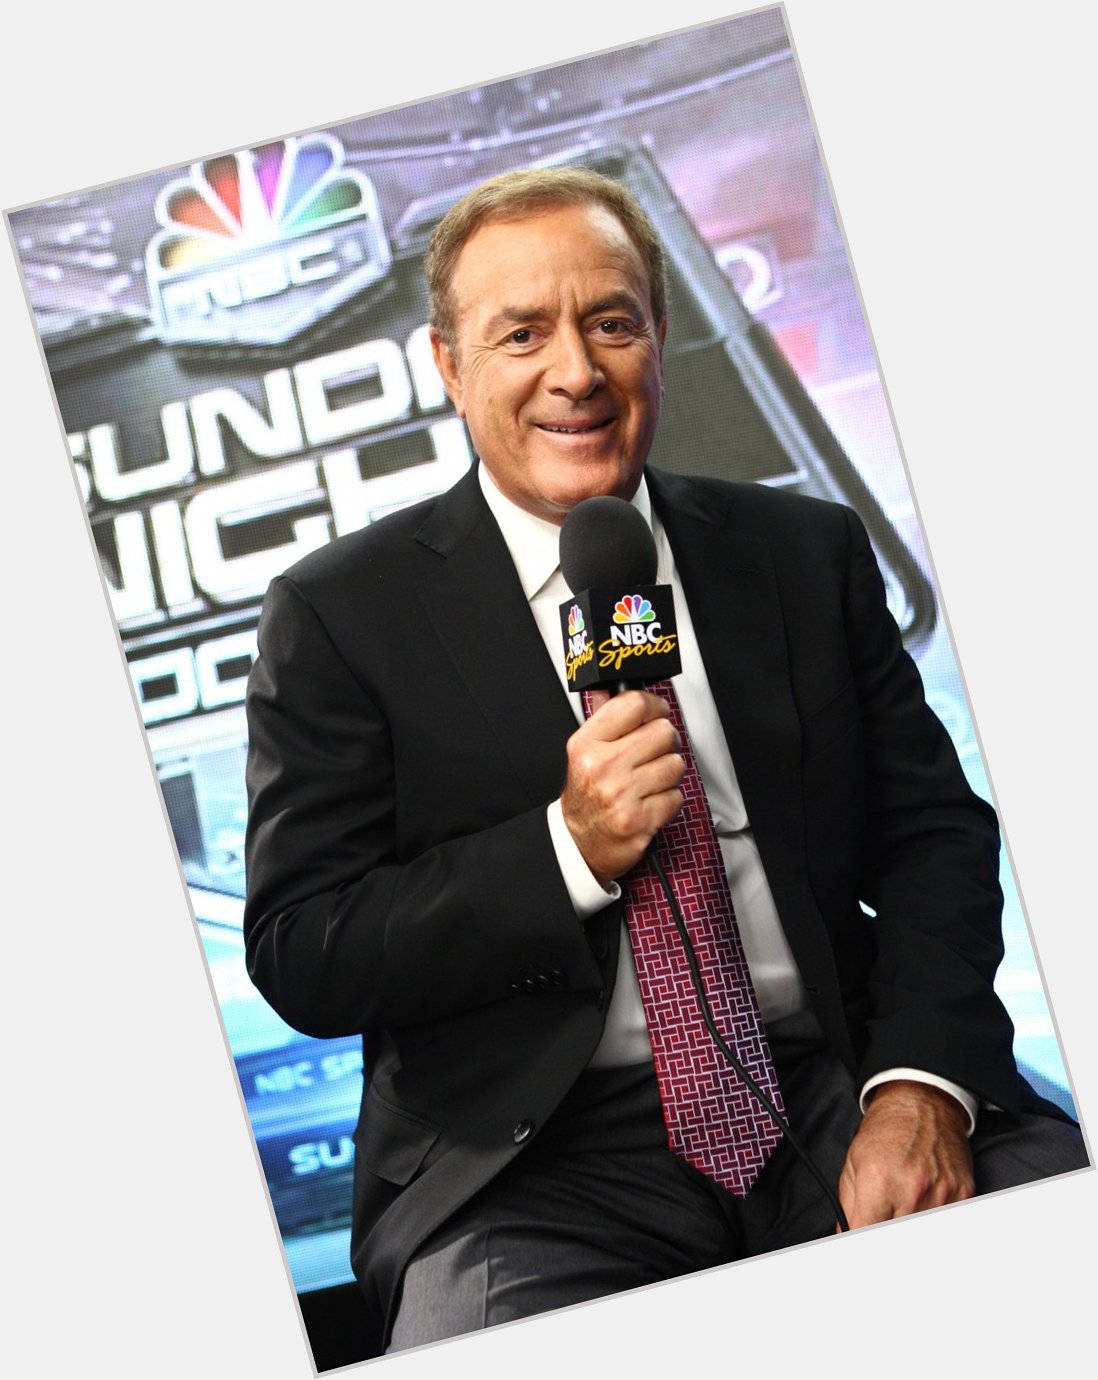 Happy Birthday to Al Michaels, who turns 73 today! 